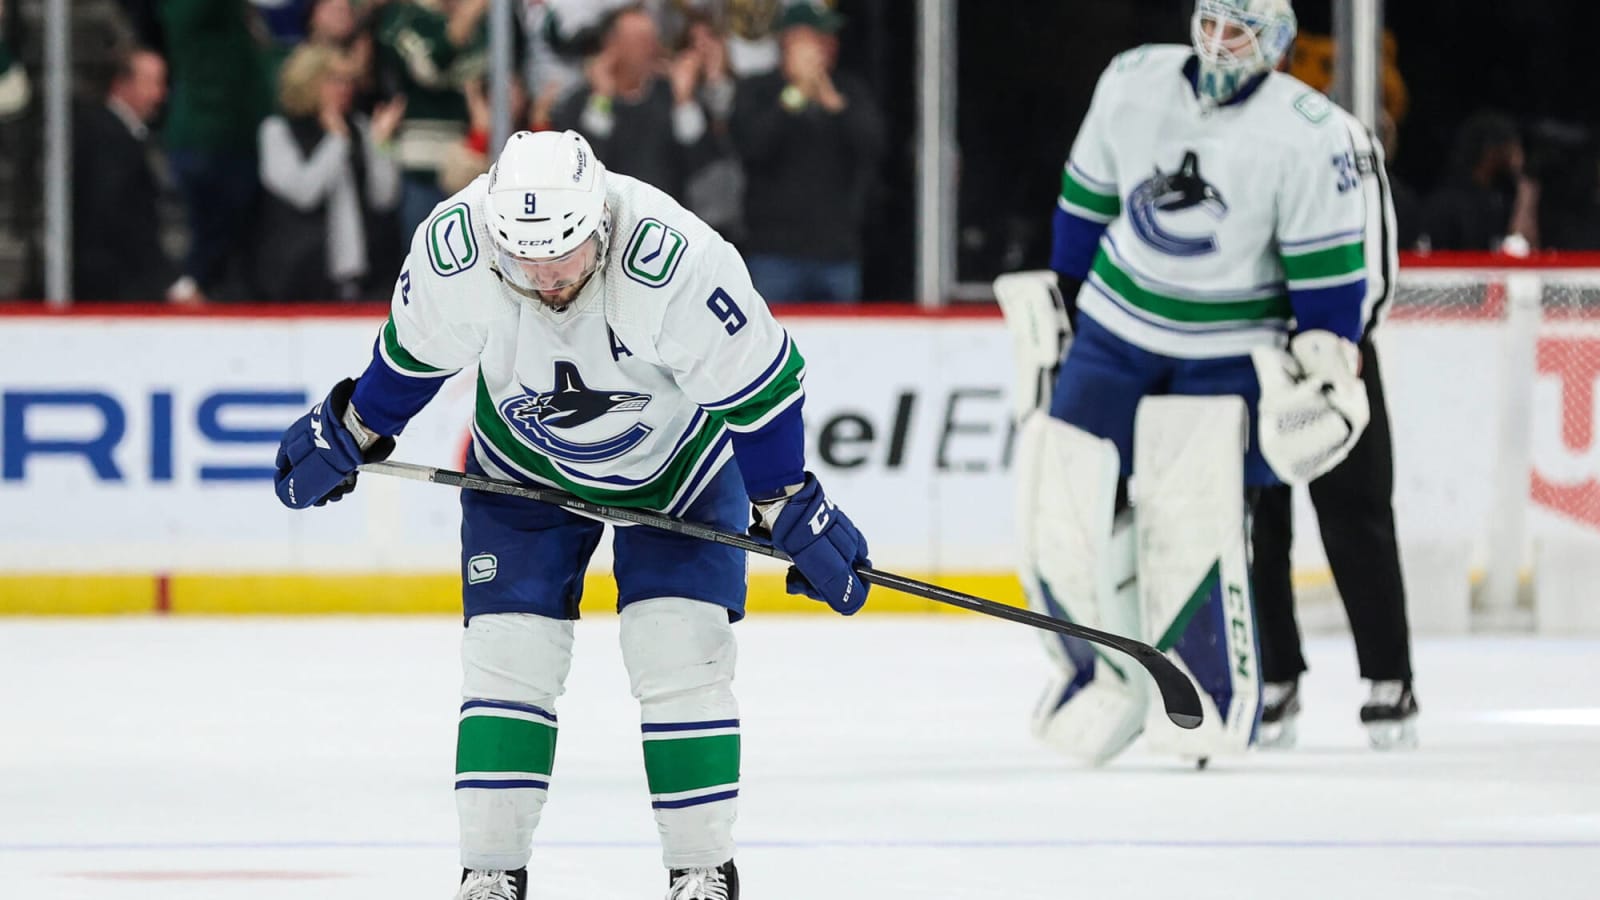 Canucks announce JT Miller out week-to-week with lower-body injury